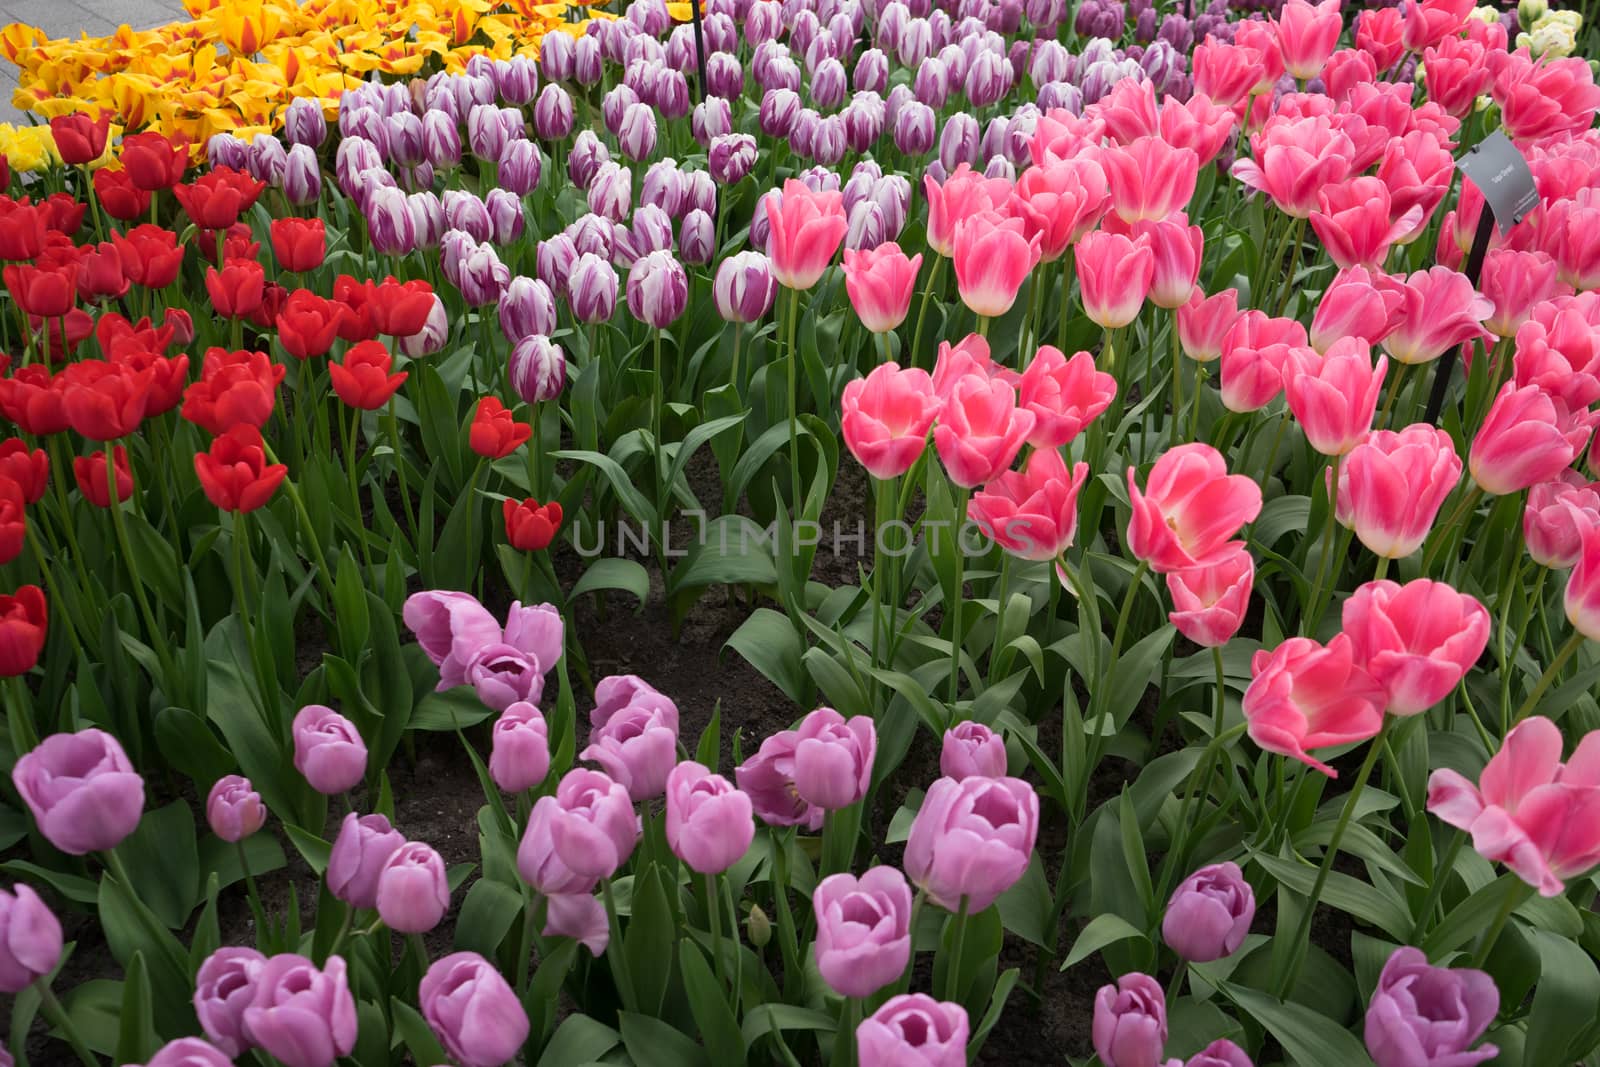 Rose, Pink, Red and Yellow colored tulips in a garden at Lisse, Netherlands, Europe on a bright summer day